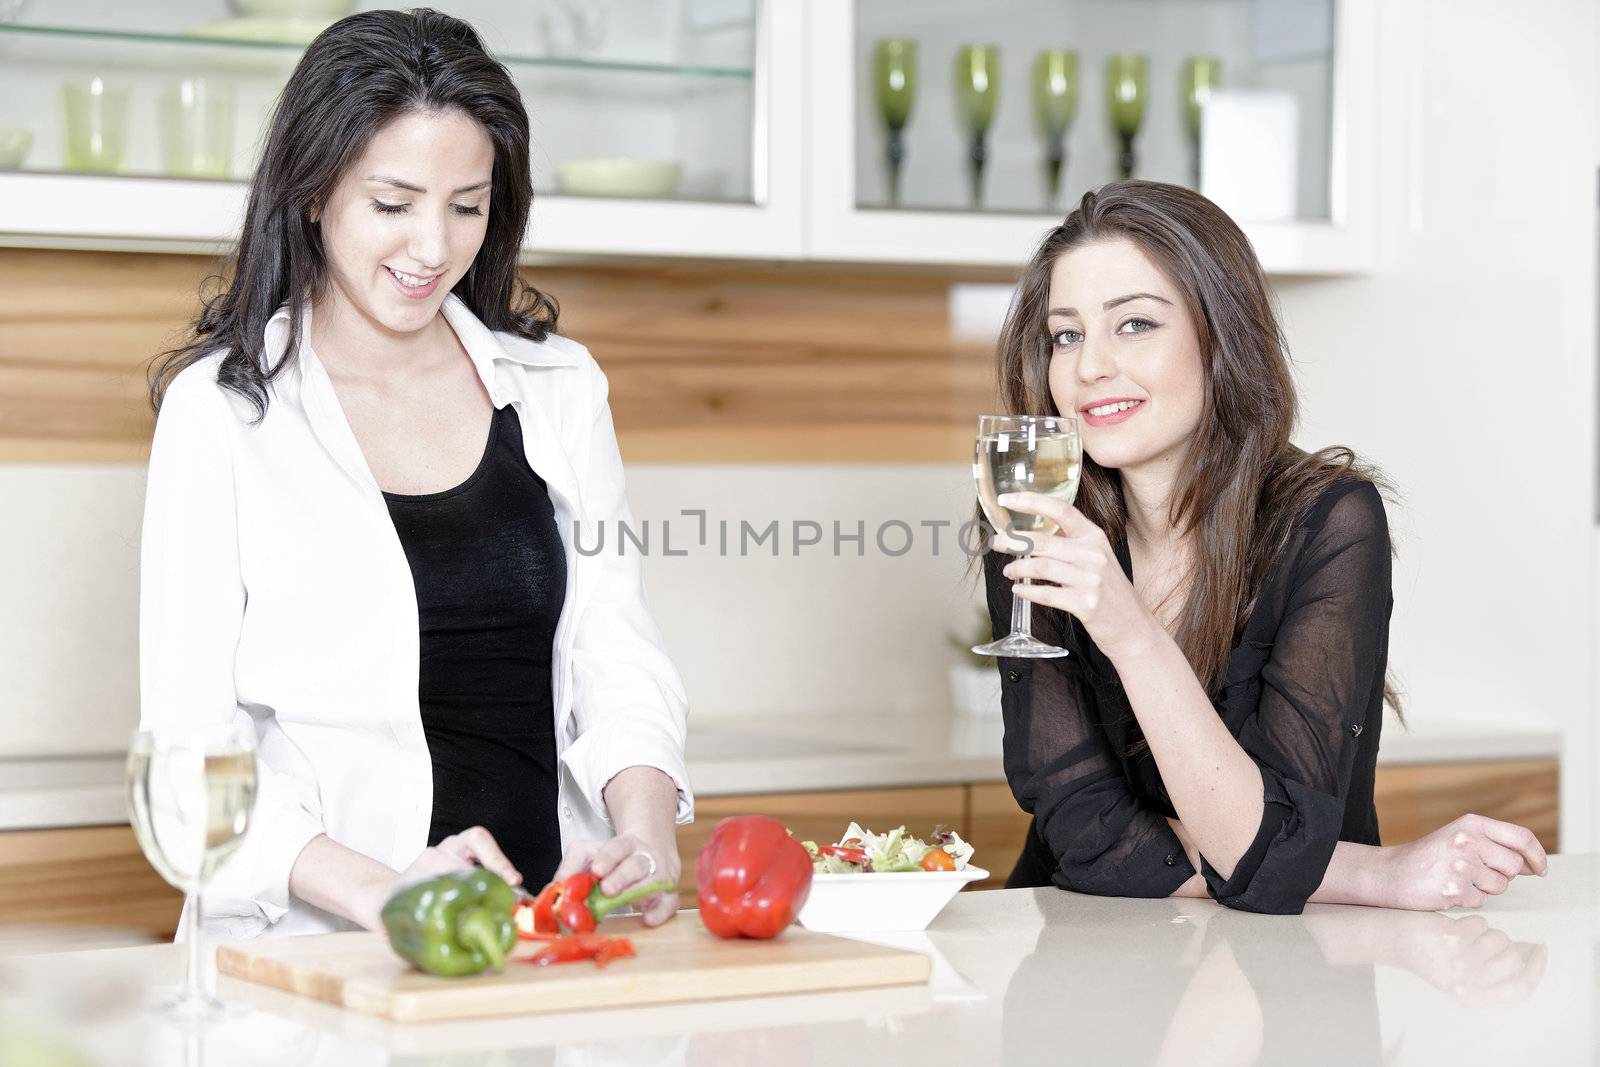 Two friends in a kitchen cooking by studiofi